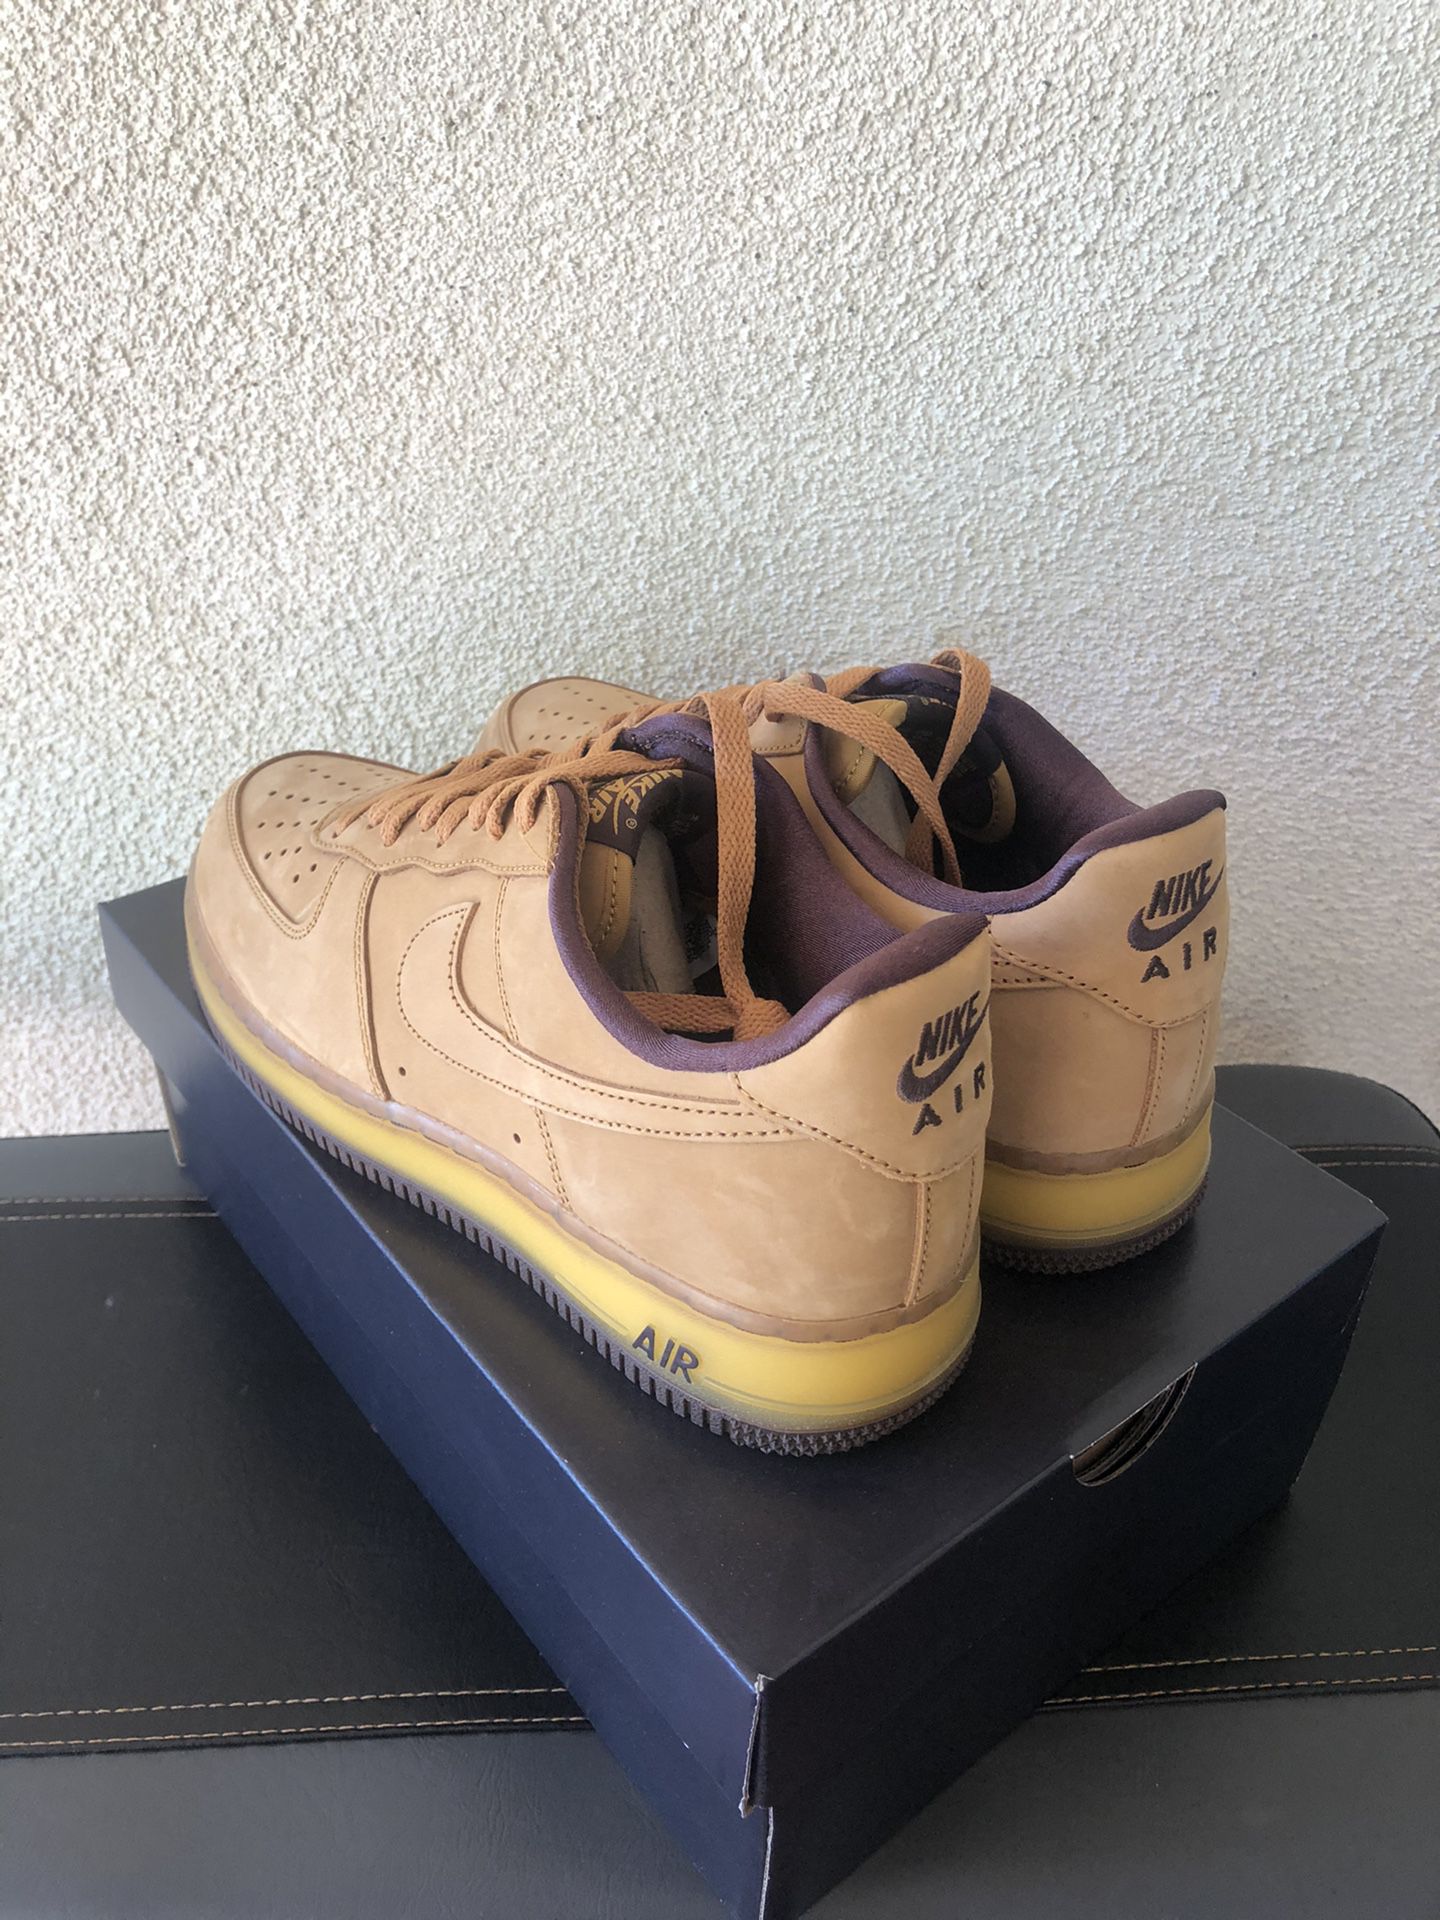 Vintage Nike Air Force 1 Premium Baroque Brown/Chino 2005 309096-221 Size  9.5 for Sale in Dallas, TX - OfferUp